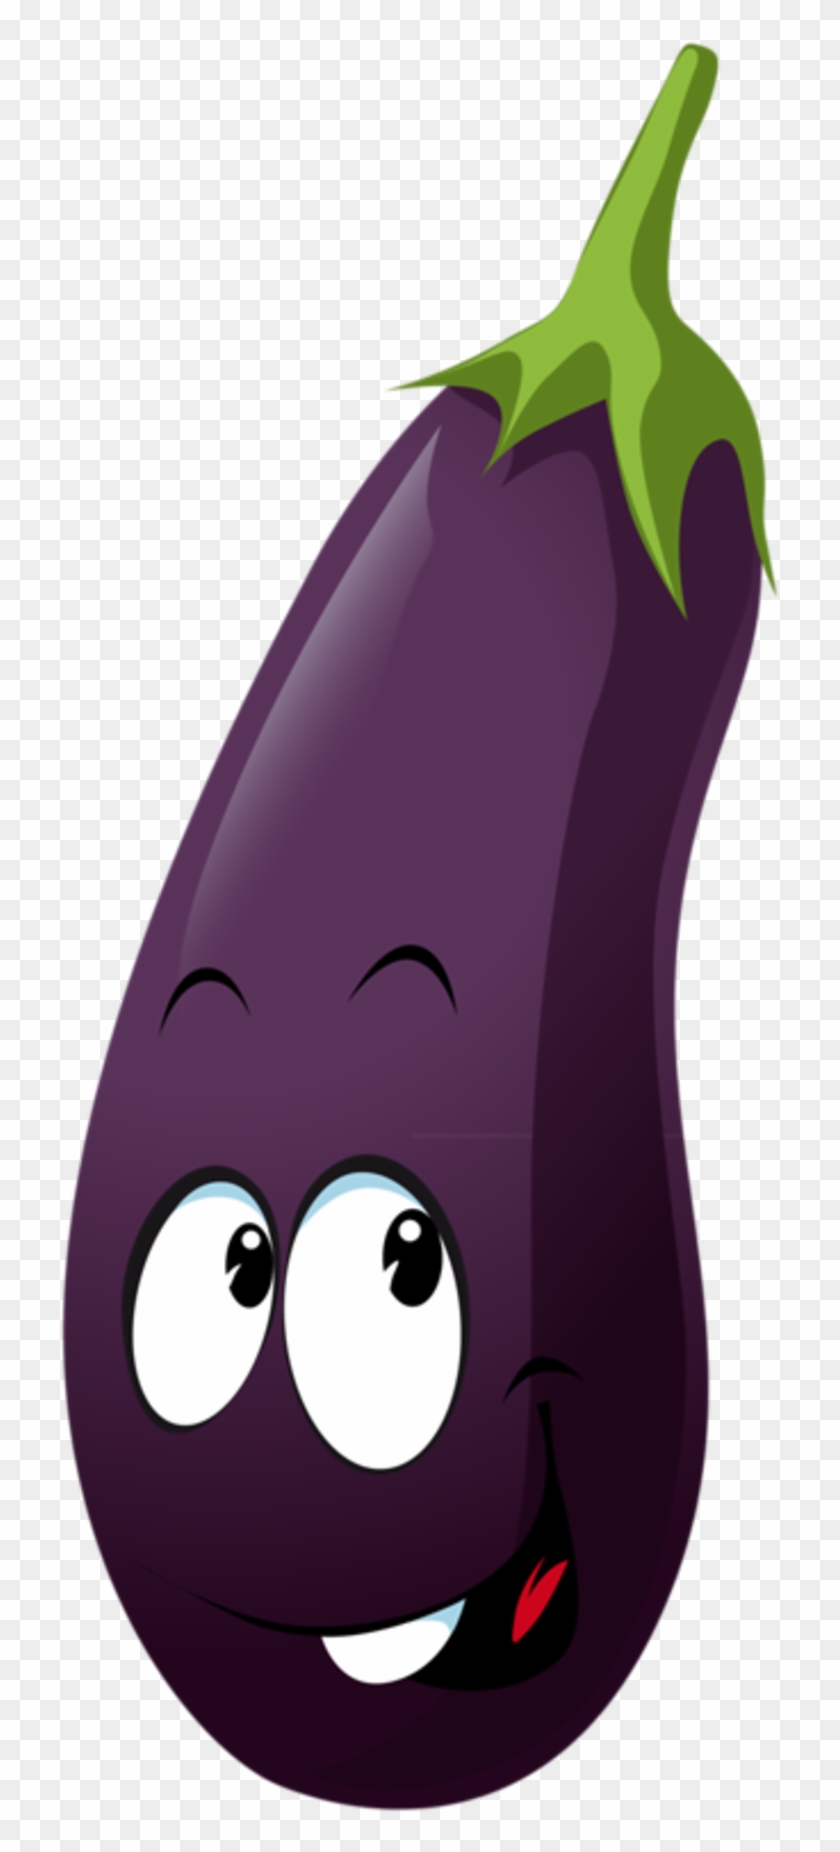 Svg Library Stock Individual Vegetable Free On - Eggplant Cartoon Png Clipart